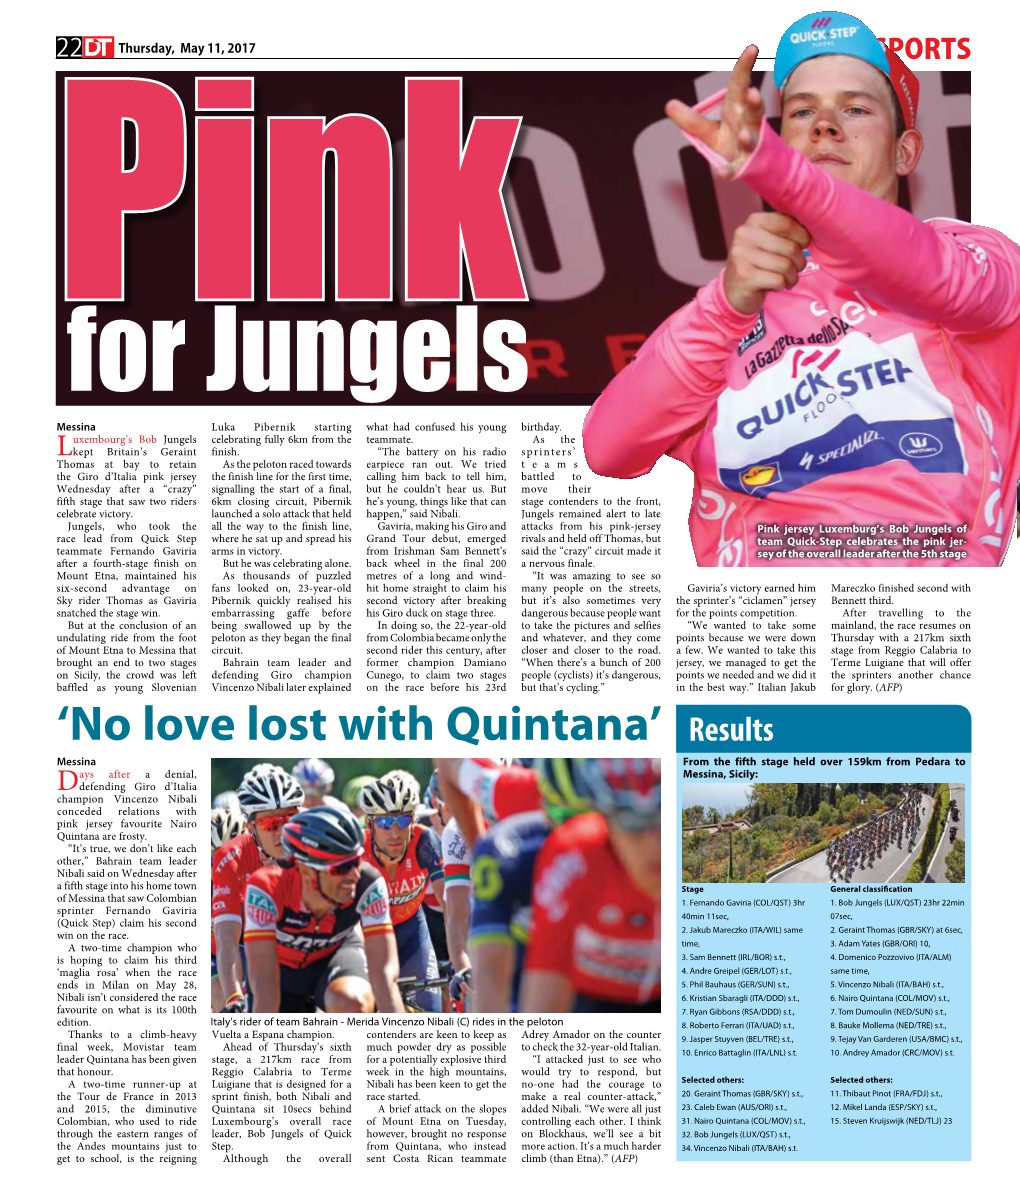 'No Love Lost with Quintana'